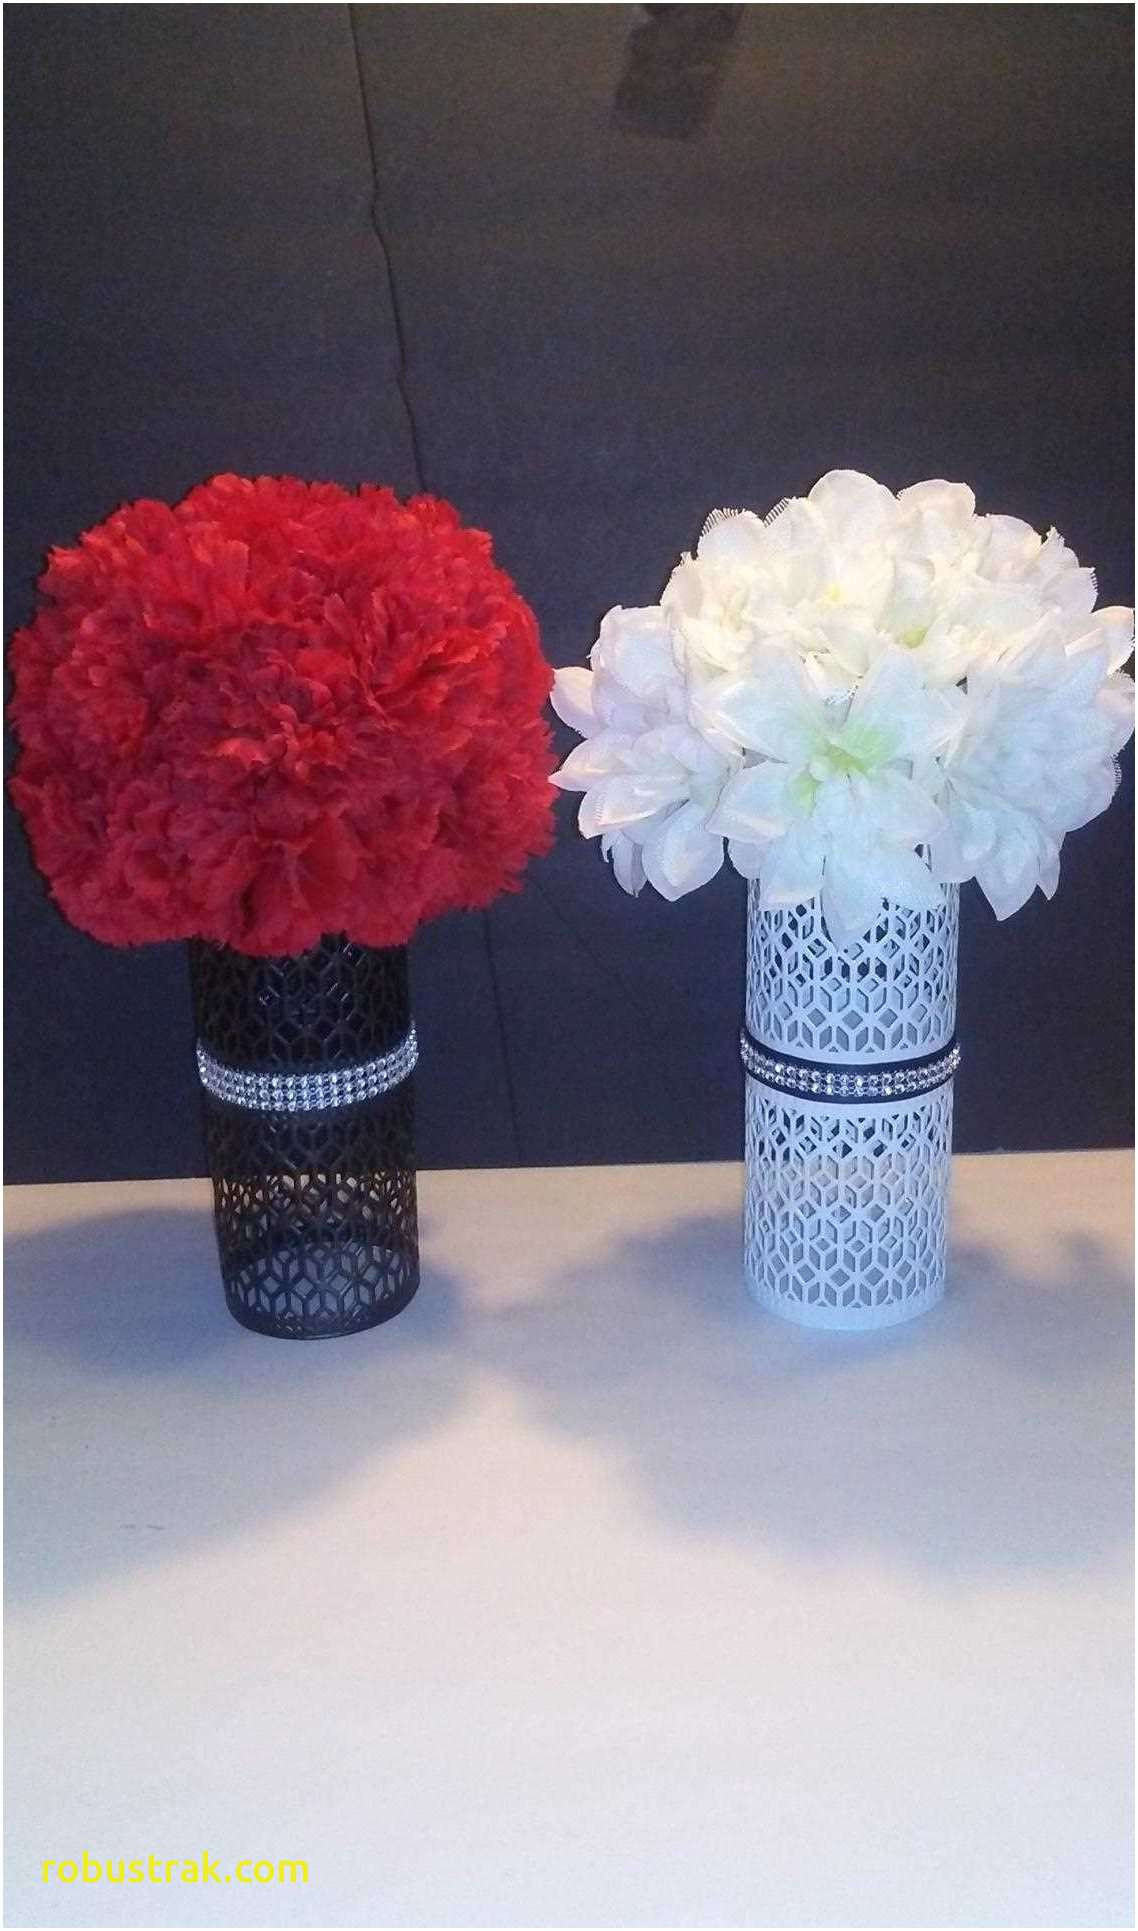 24 Popular Cheap Plastic Vases for Centerpieces 2022 free download cheap plastic vases for centerpieces of inspirational how to decorate roses in a vase home design ideas intended for wedding decor flowers astounding dollar tree wedding decorations awesome 